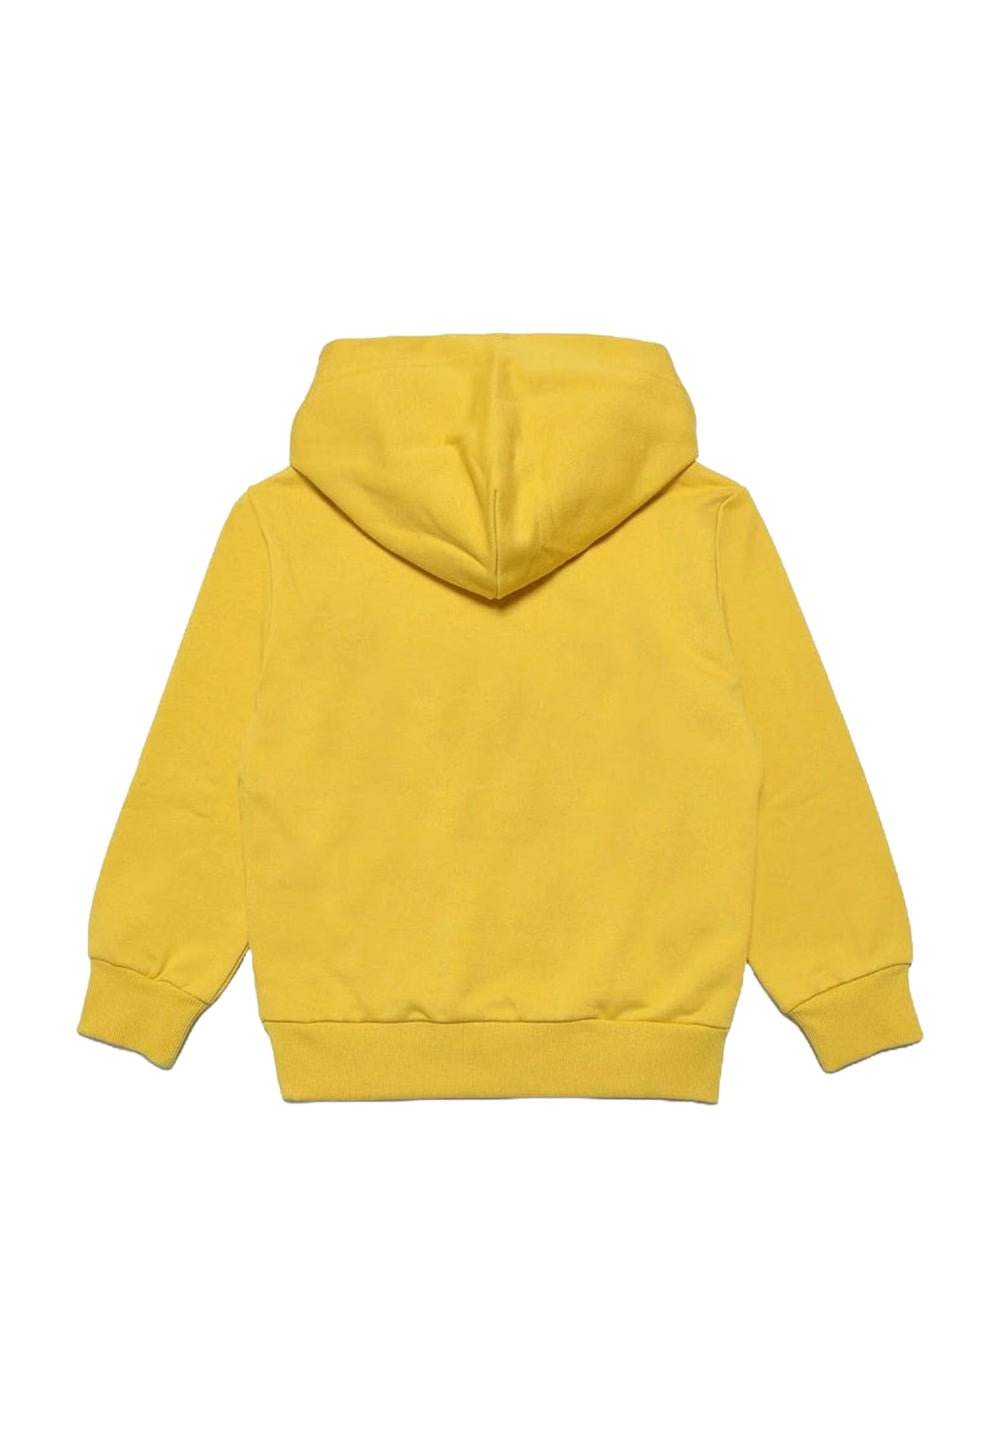 Yellow hoodie for boys